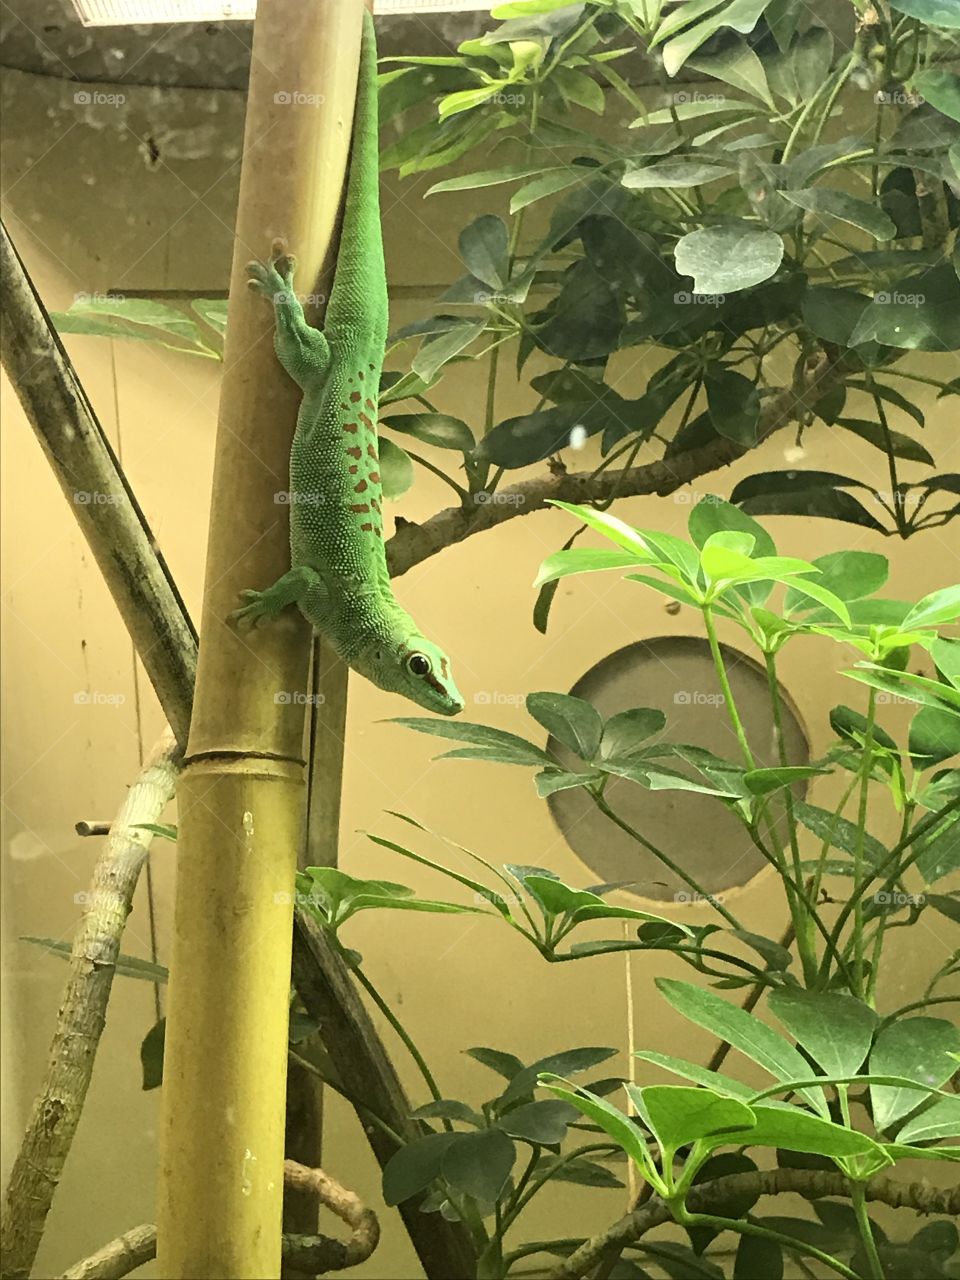 Gecko at the National zoo in Washington DC